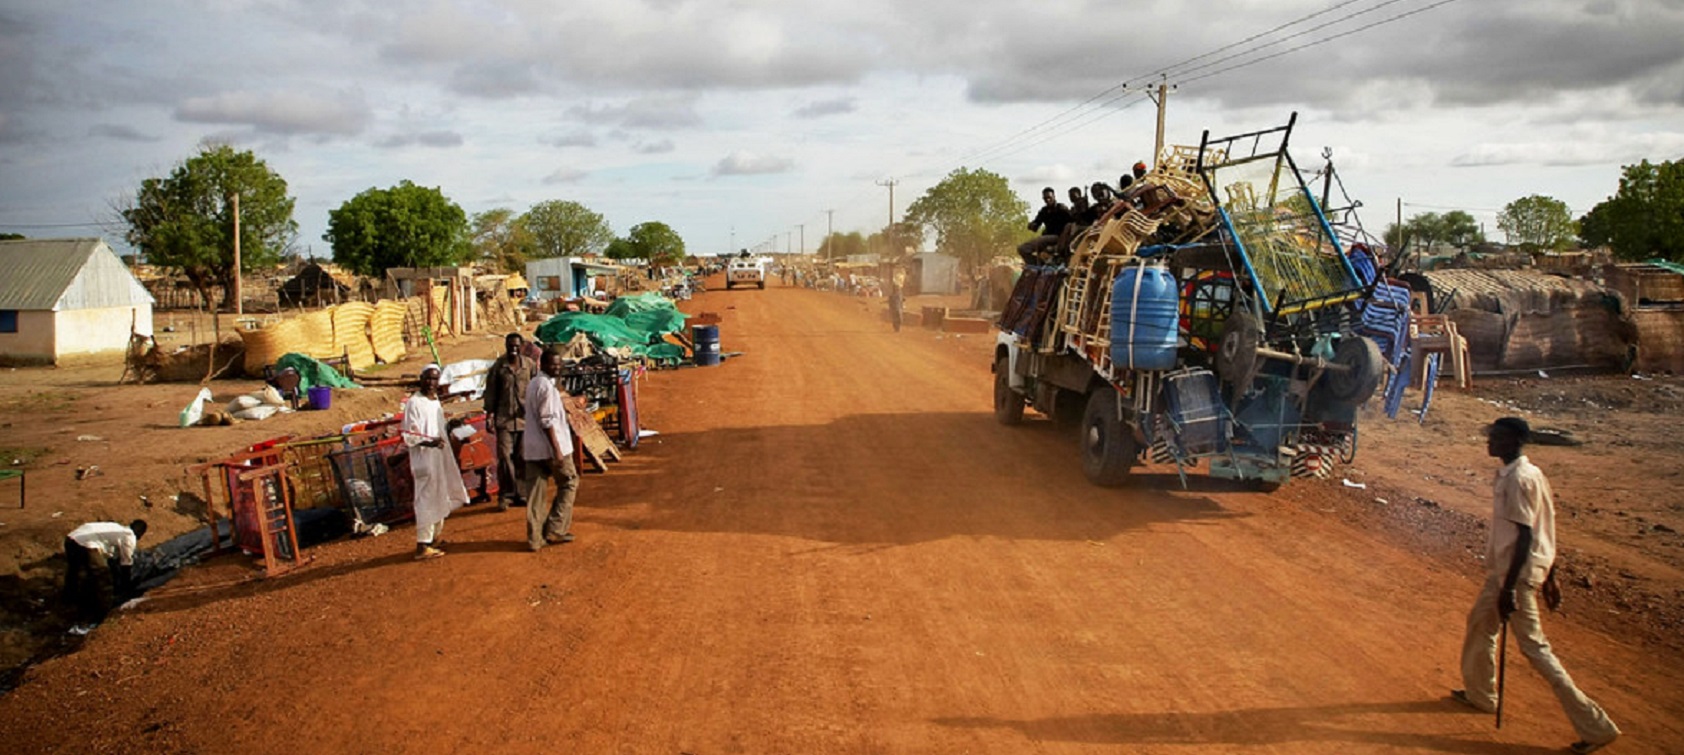 Aftermath of Attack on Abyei, Ethiopia. Image credit: United Nations Photo is licensed under CC BY-NC-ND 2.0.